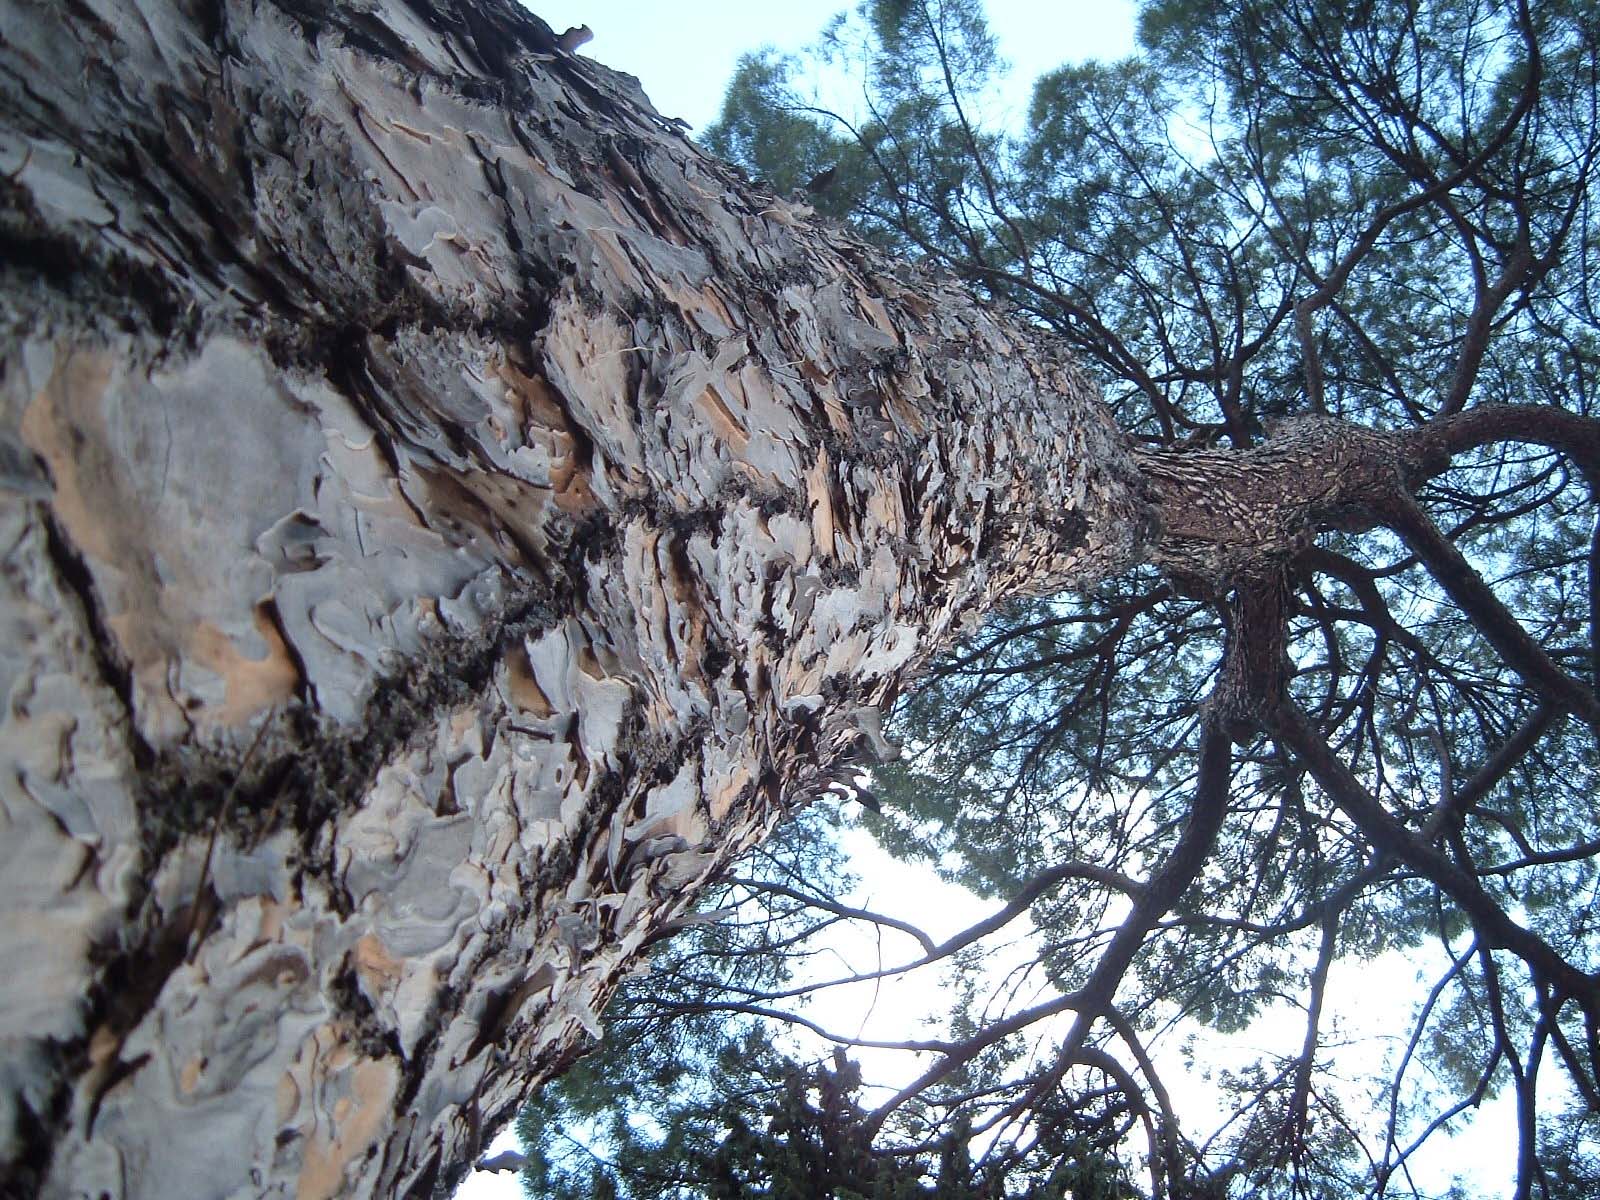 the bark of an old pine tree looking up